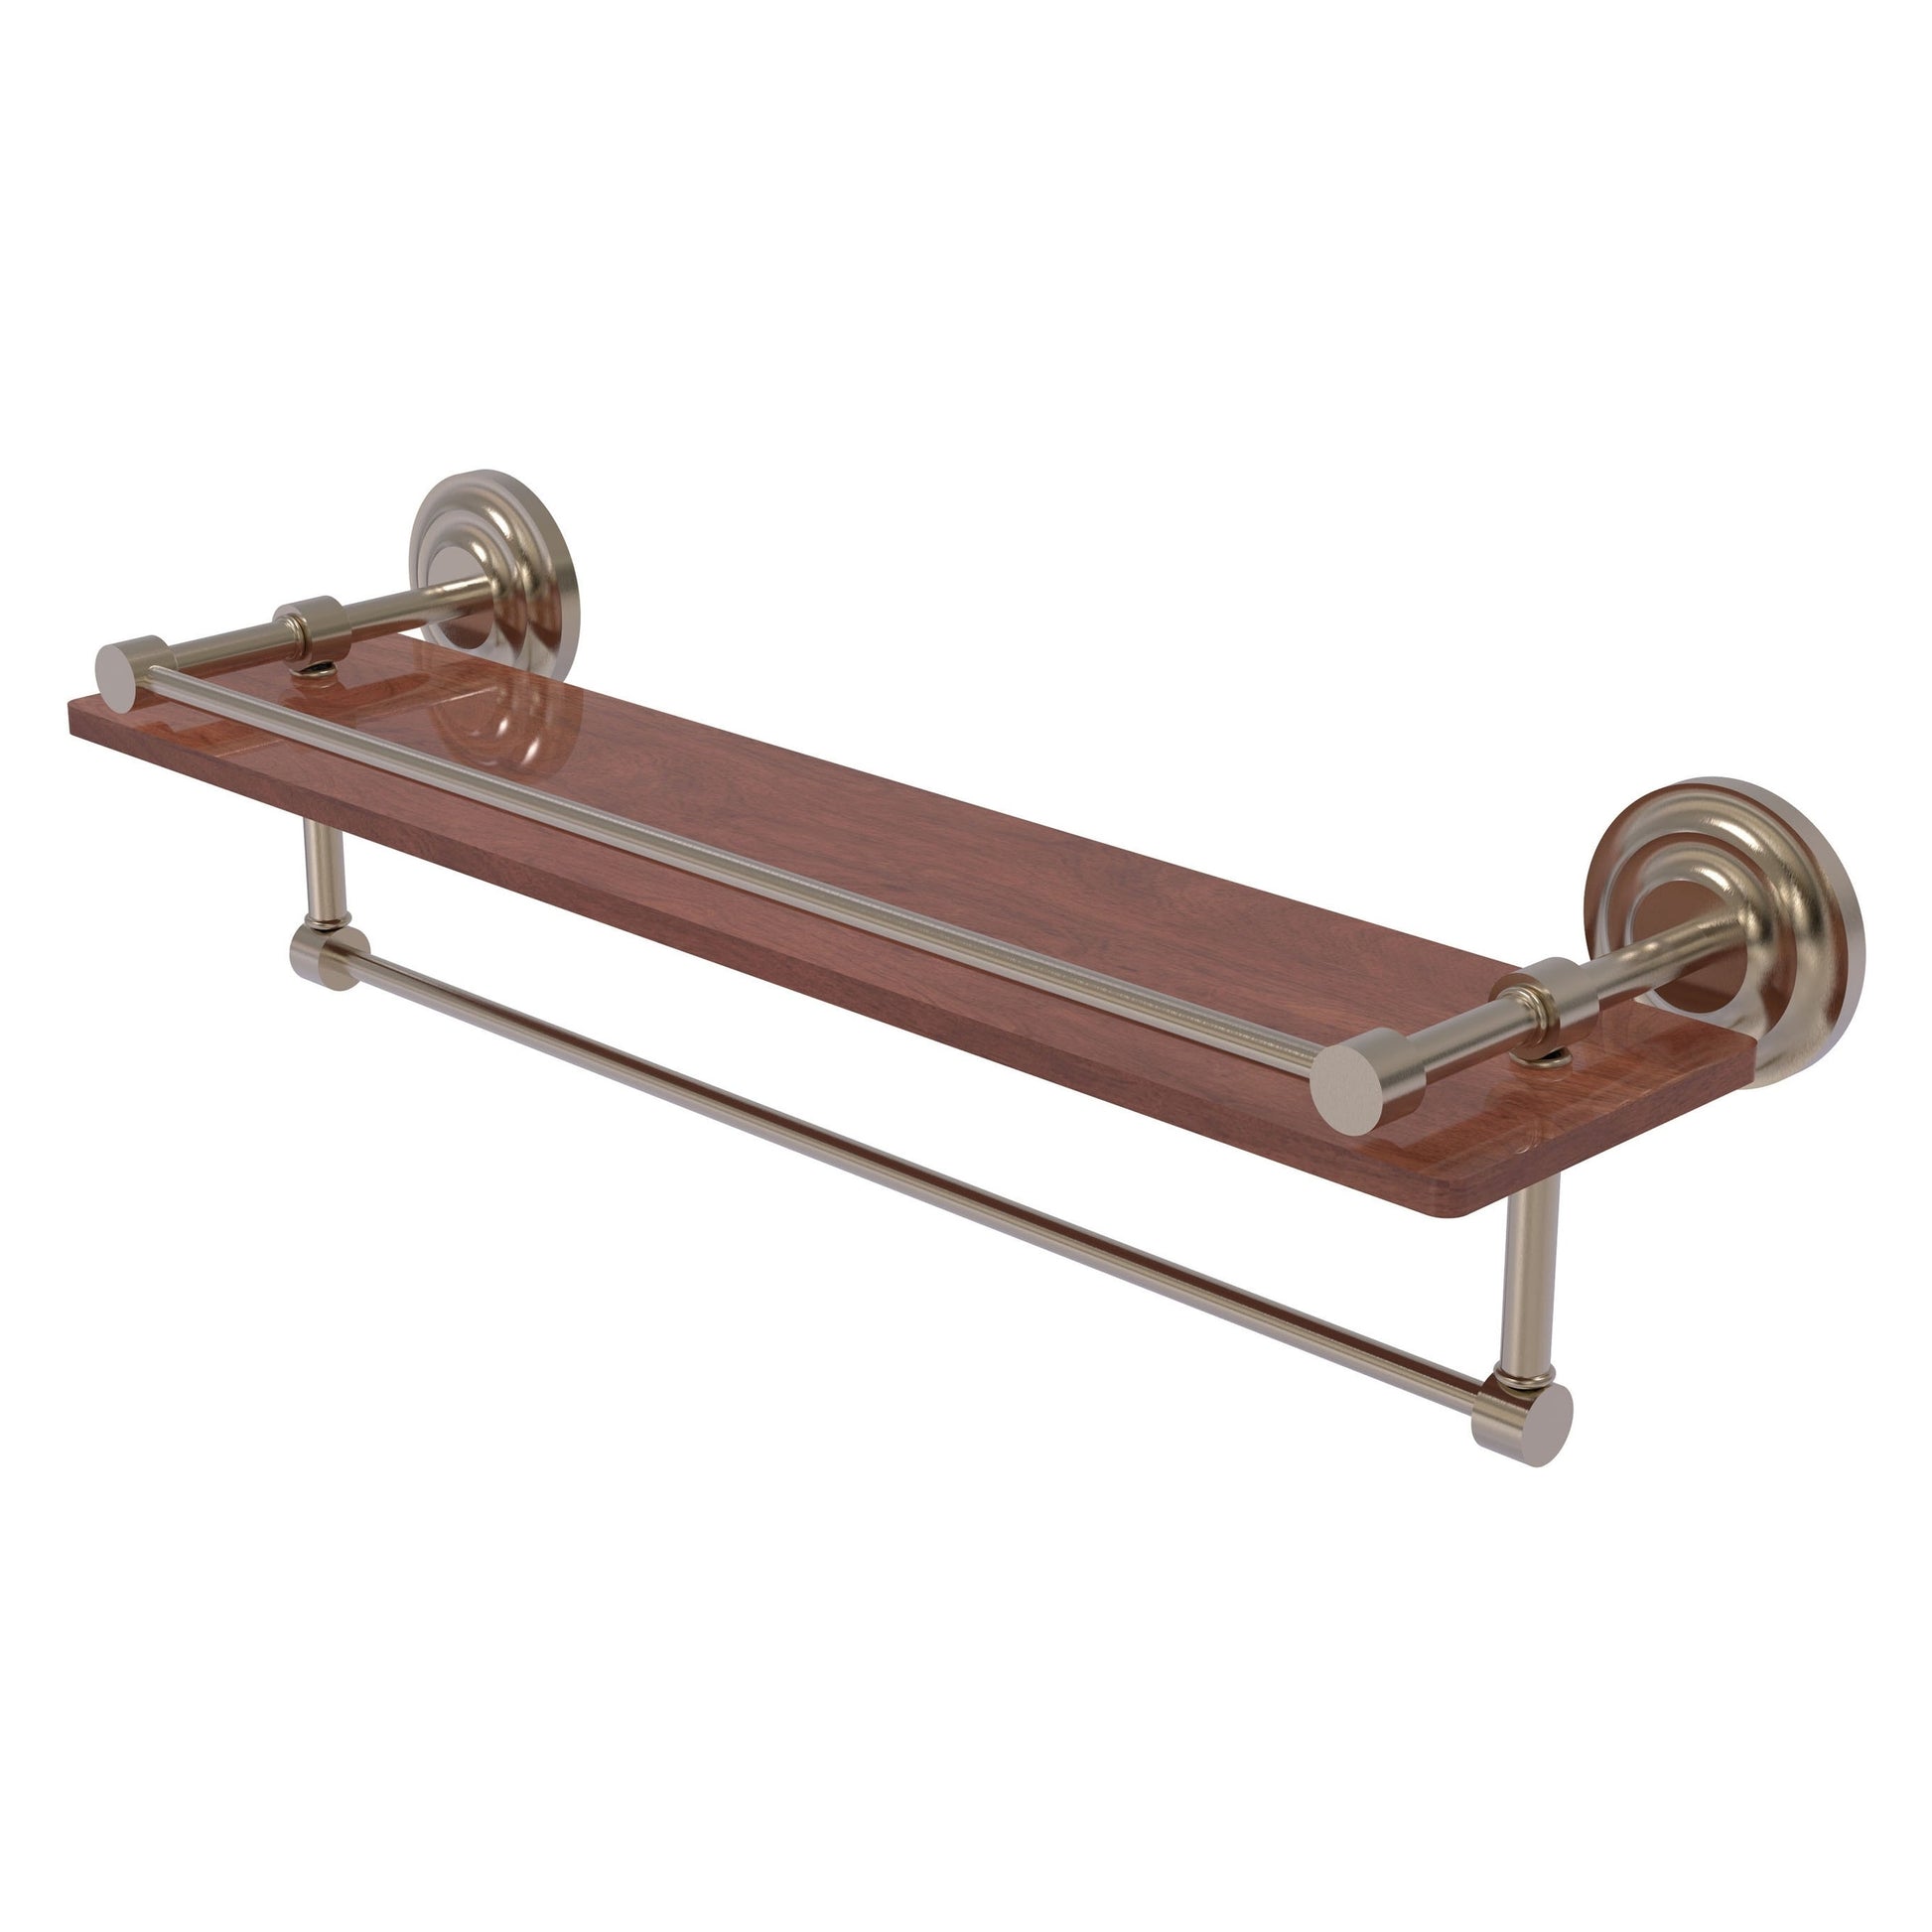 Allied Brass Que New 22" x 5" Antique Pewter Solid Brass 22-Inch IPE Ironwood Shelf With Gallery Rail and Towel Bar